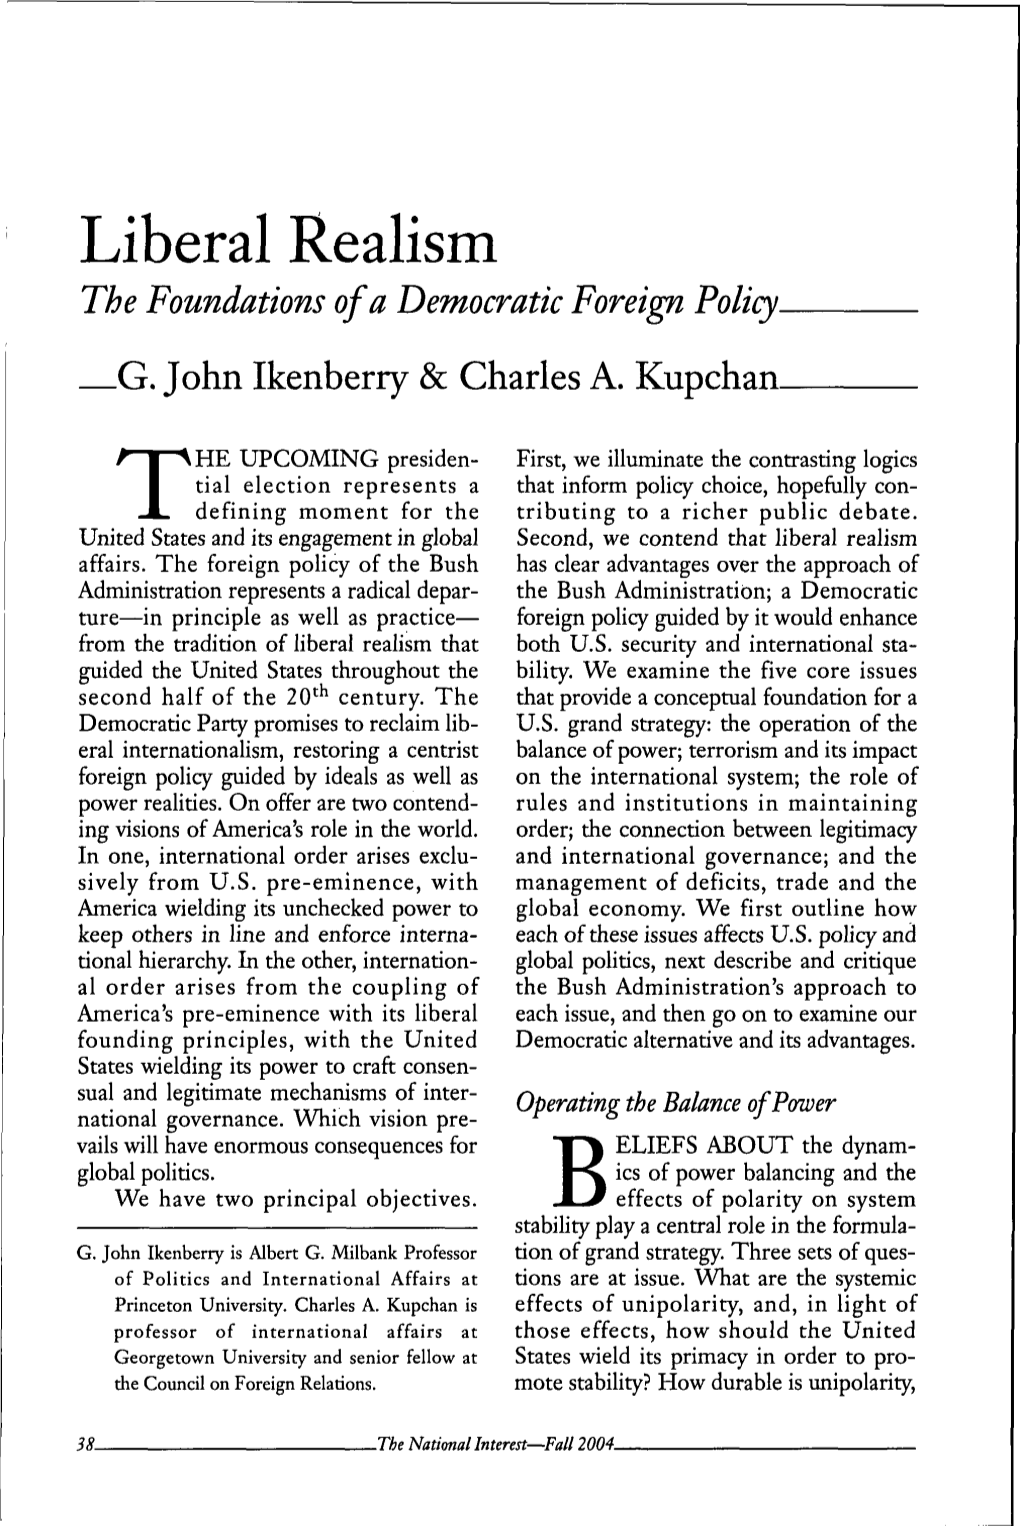 Liberal Realism the Foundations of a Democratic Foreign Policy